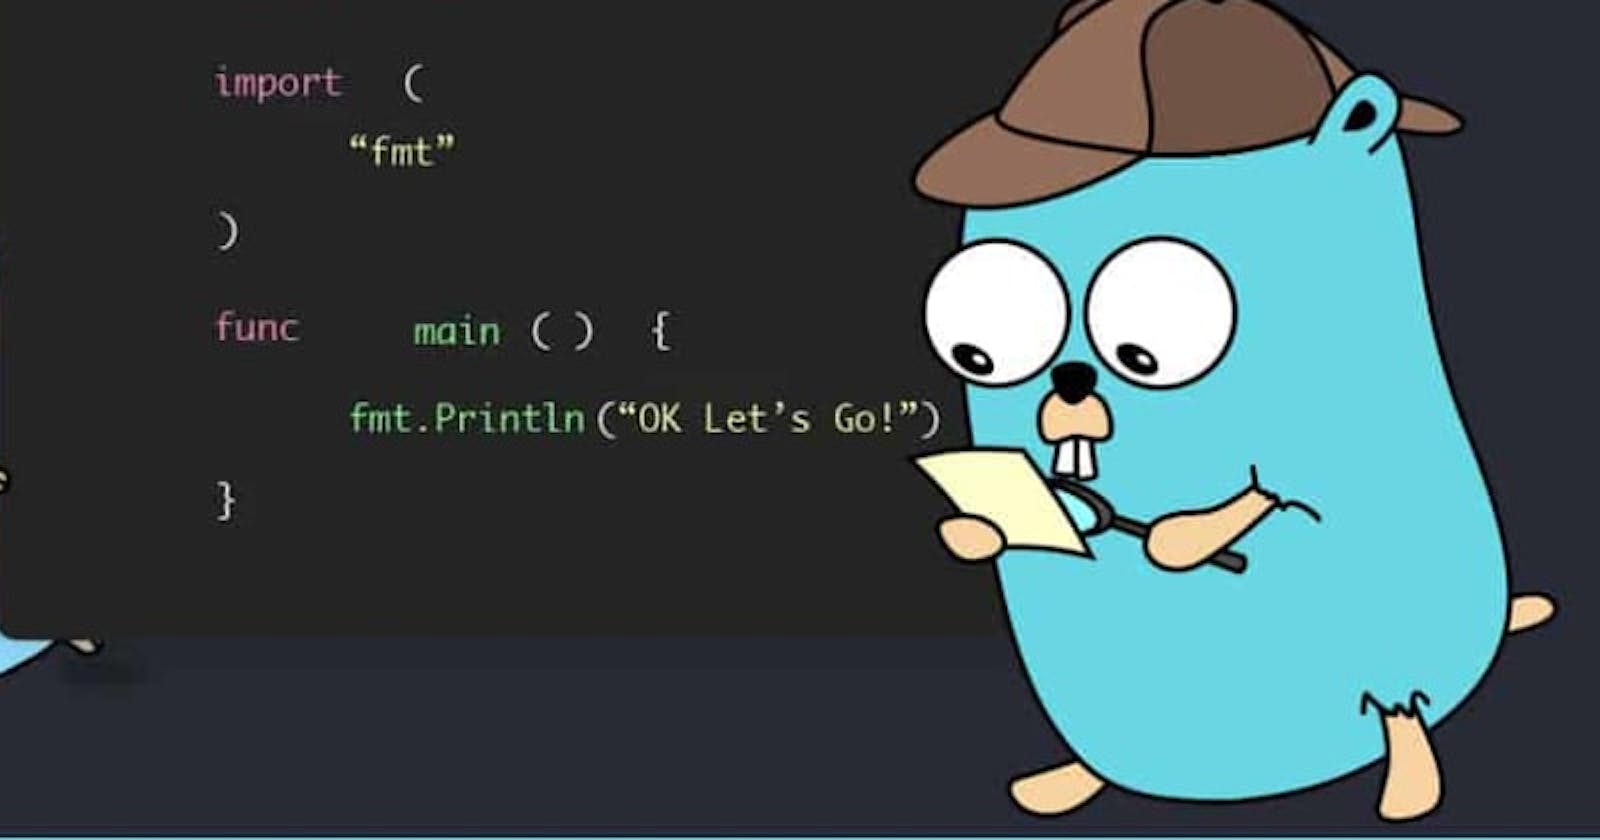 State of Golang linters and the differences between them